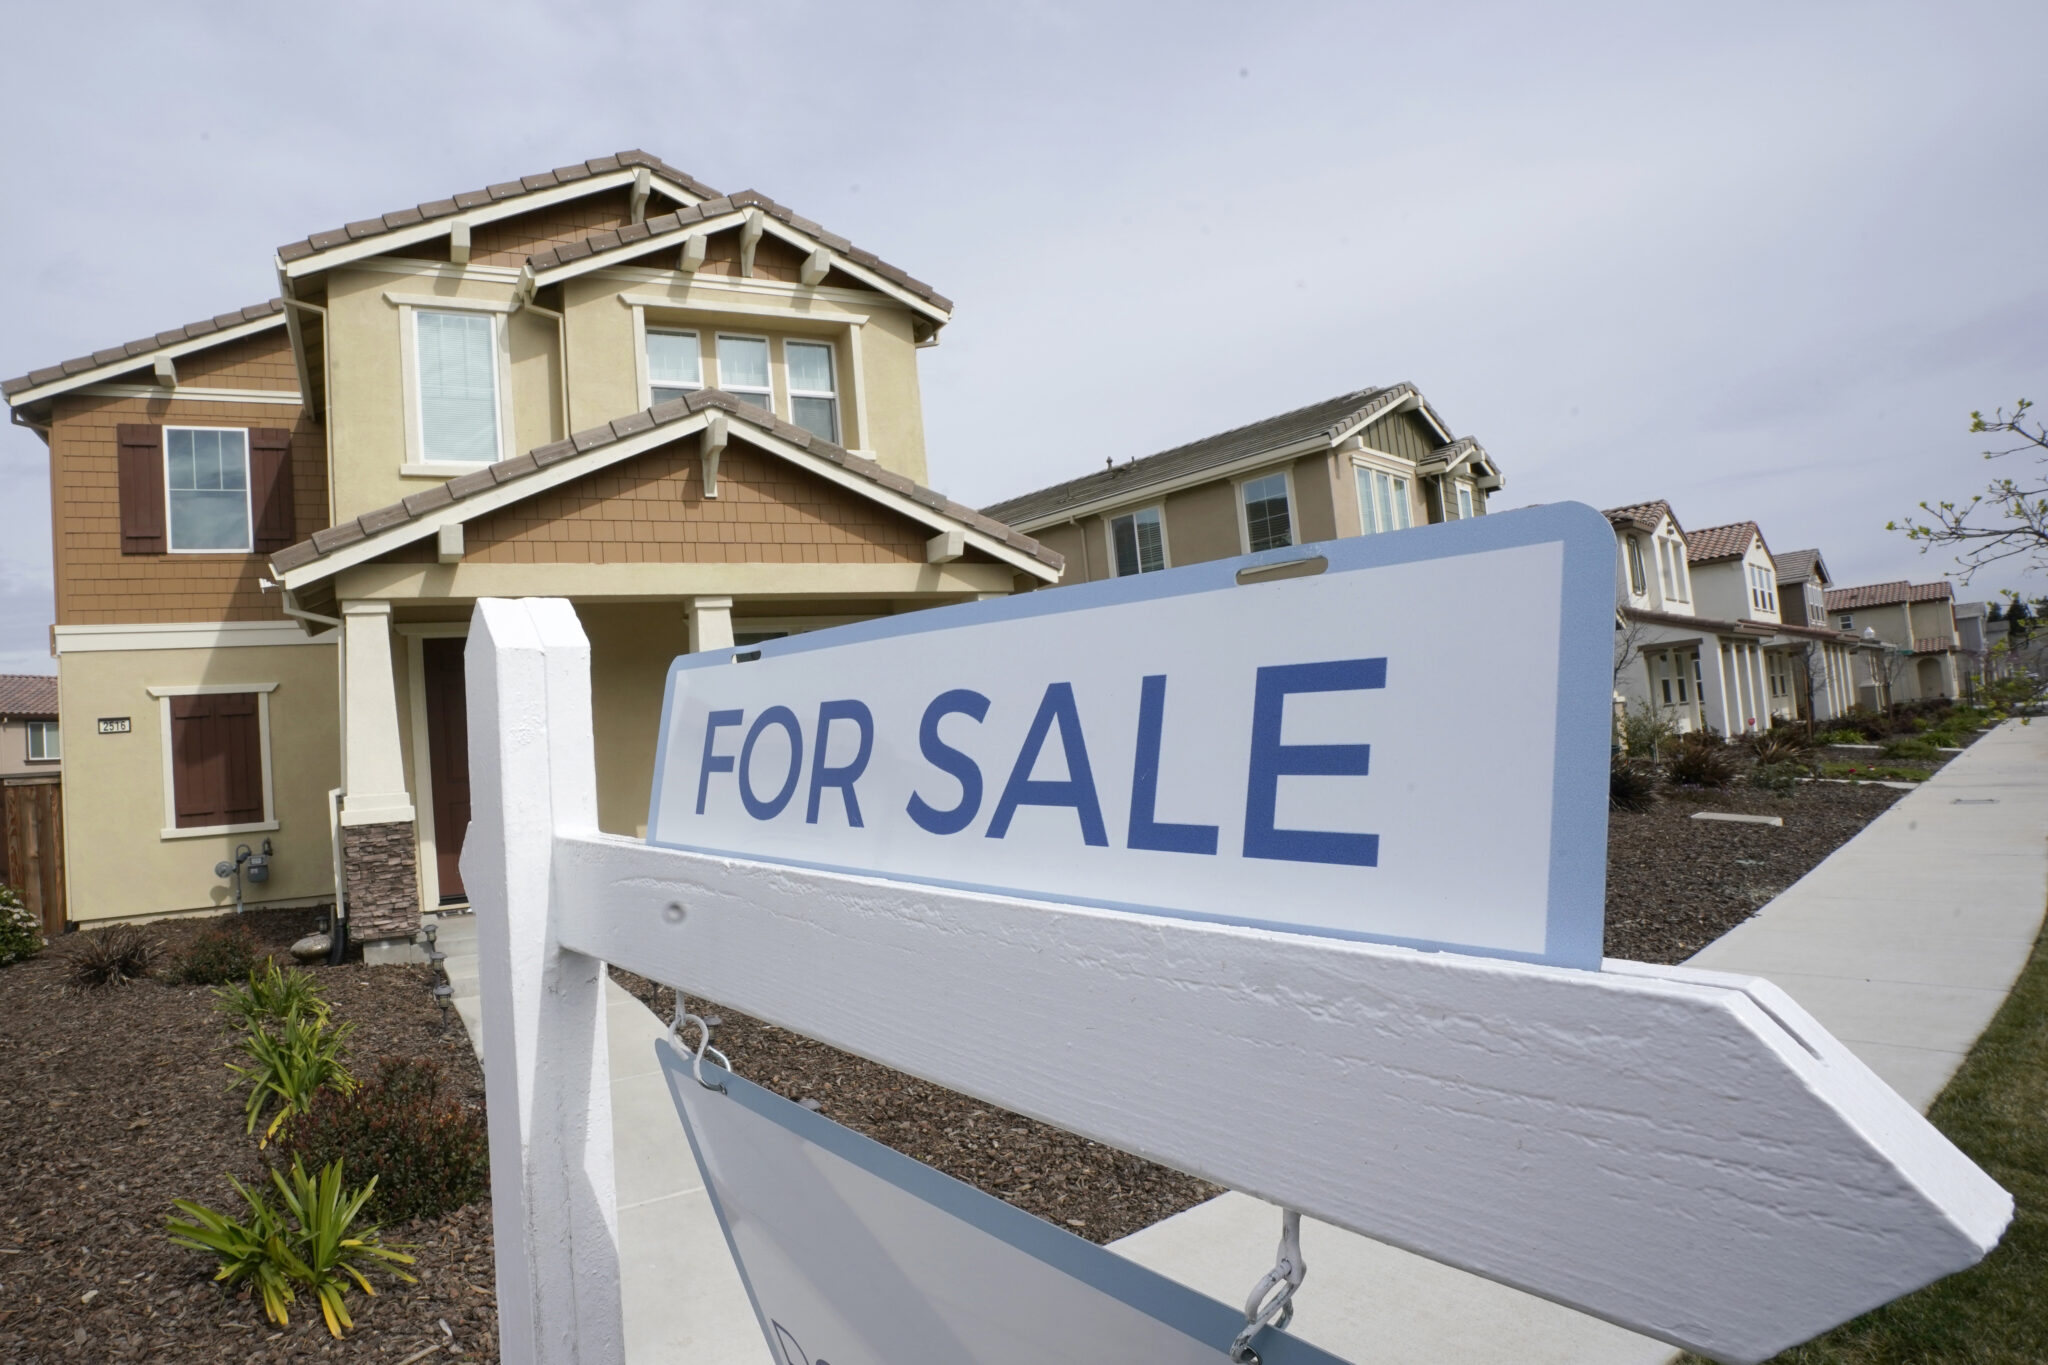 California homes sales rebound as prices continue to rise